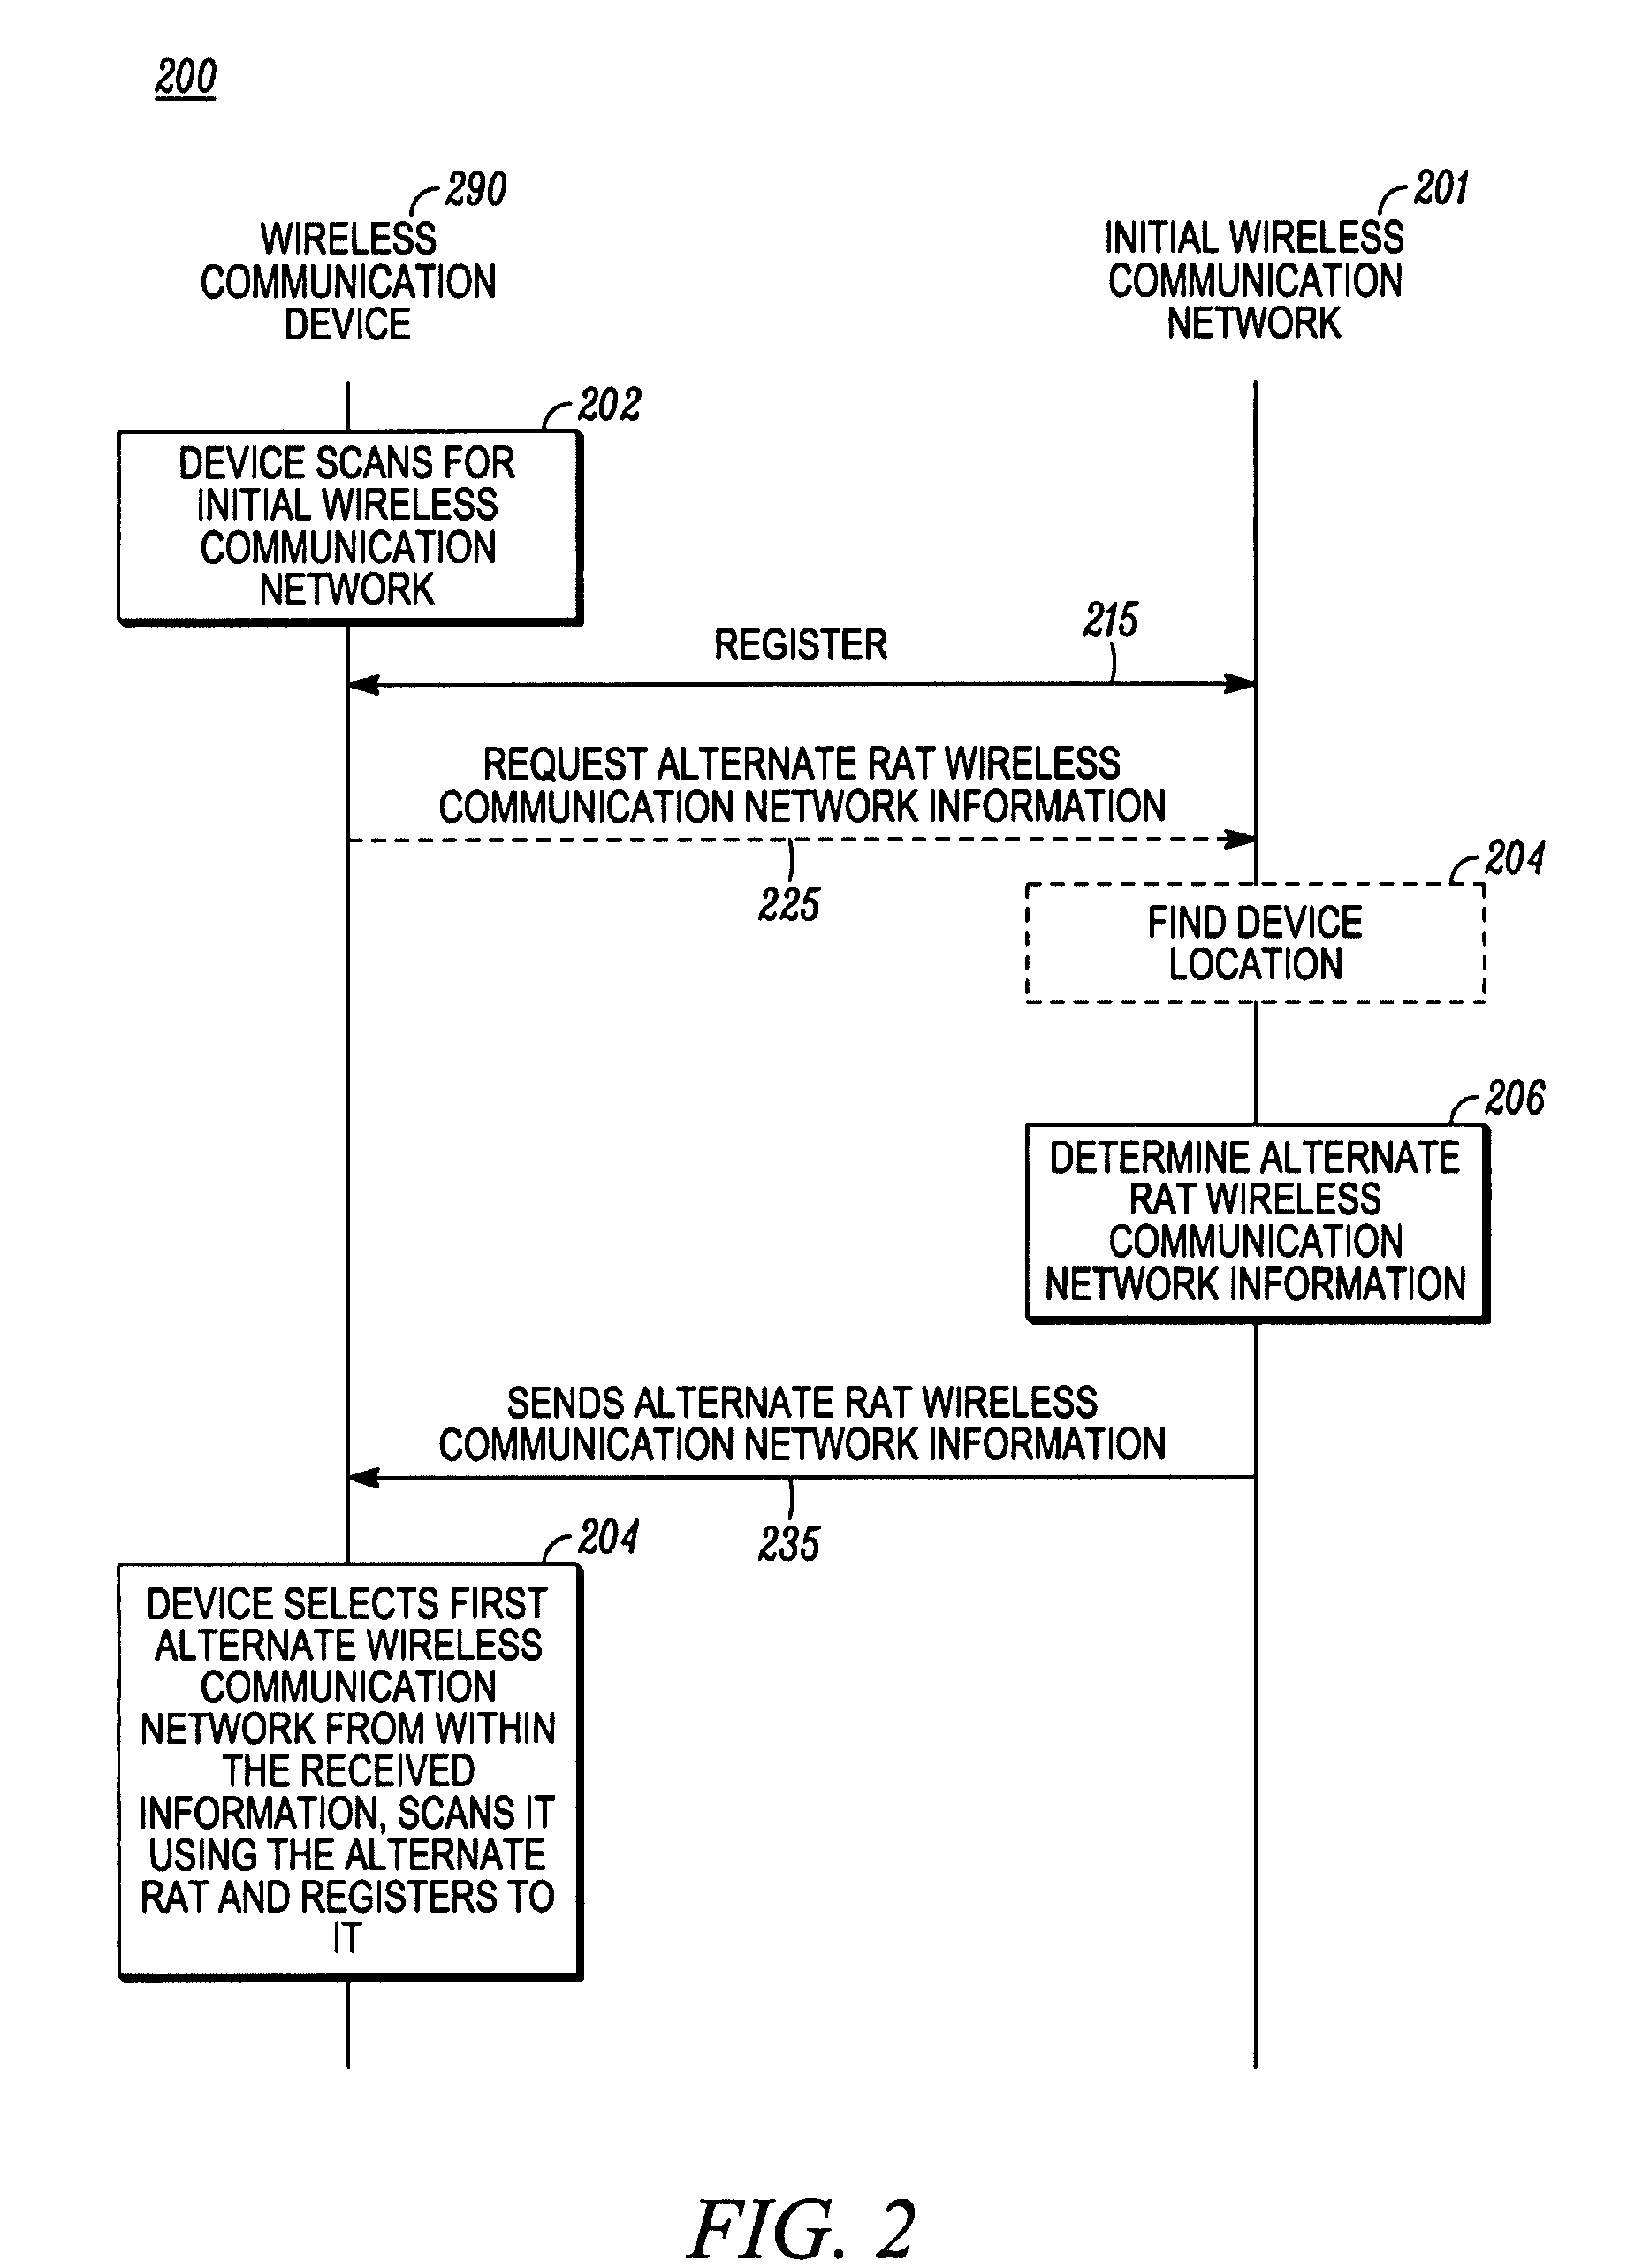 Method and apparatus for detecting an alternate wireless communication network